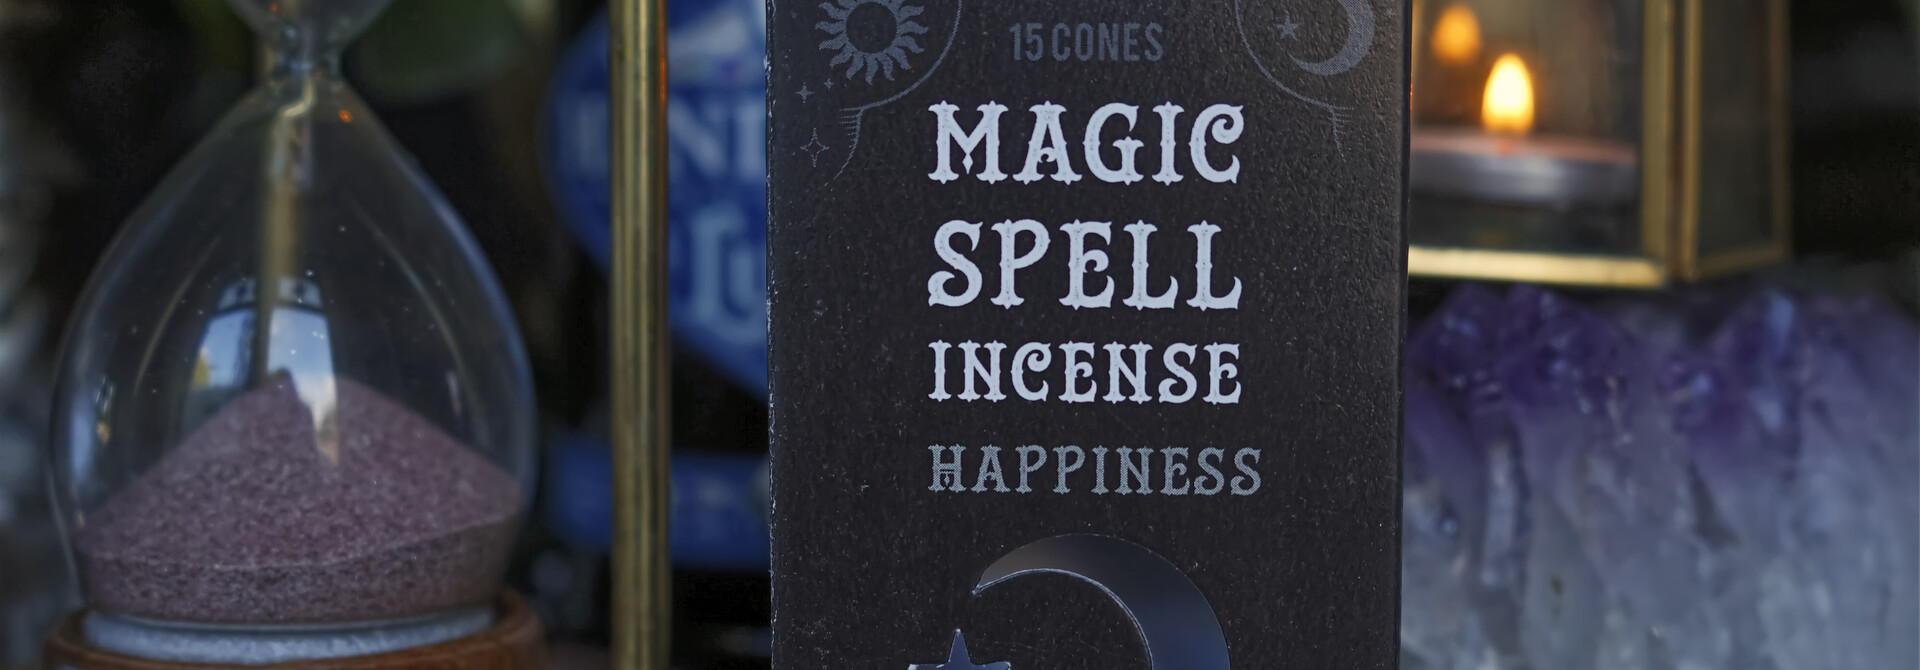 Magic Spell Incense Cones HAPPINESS